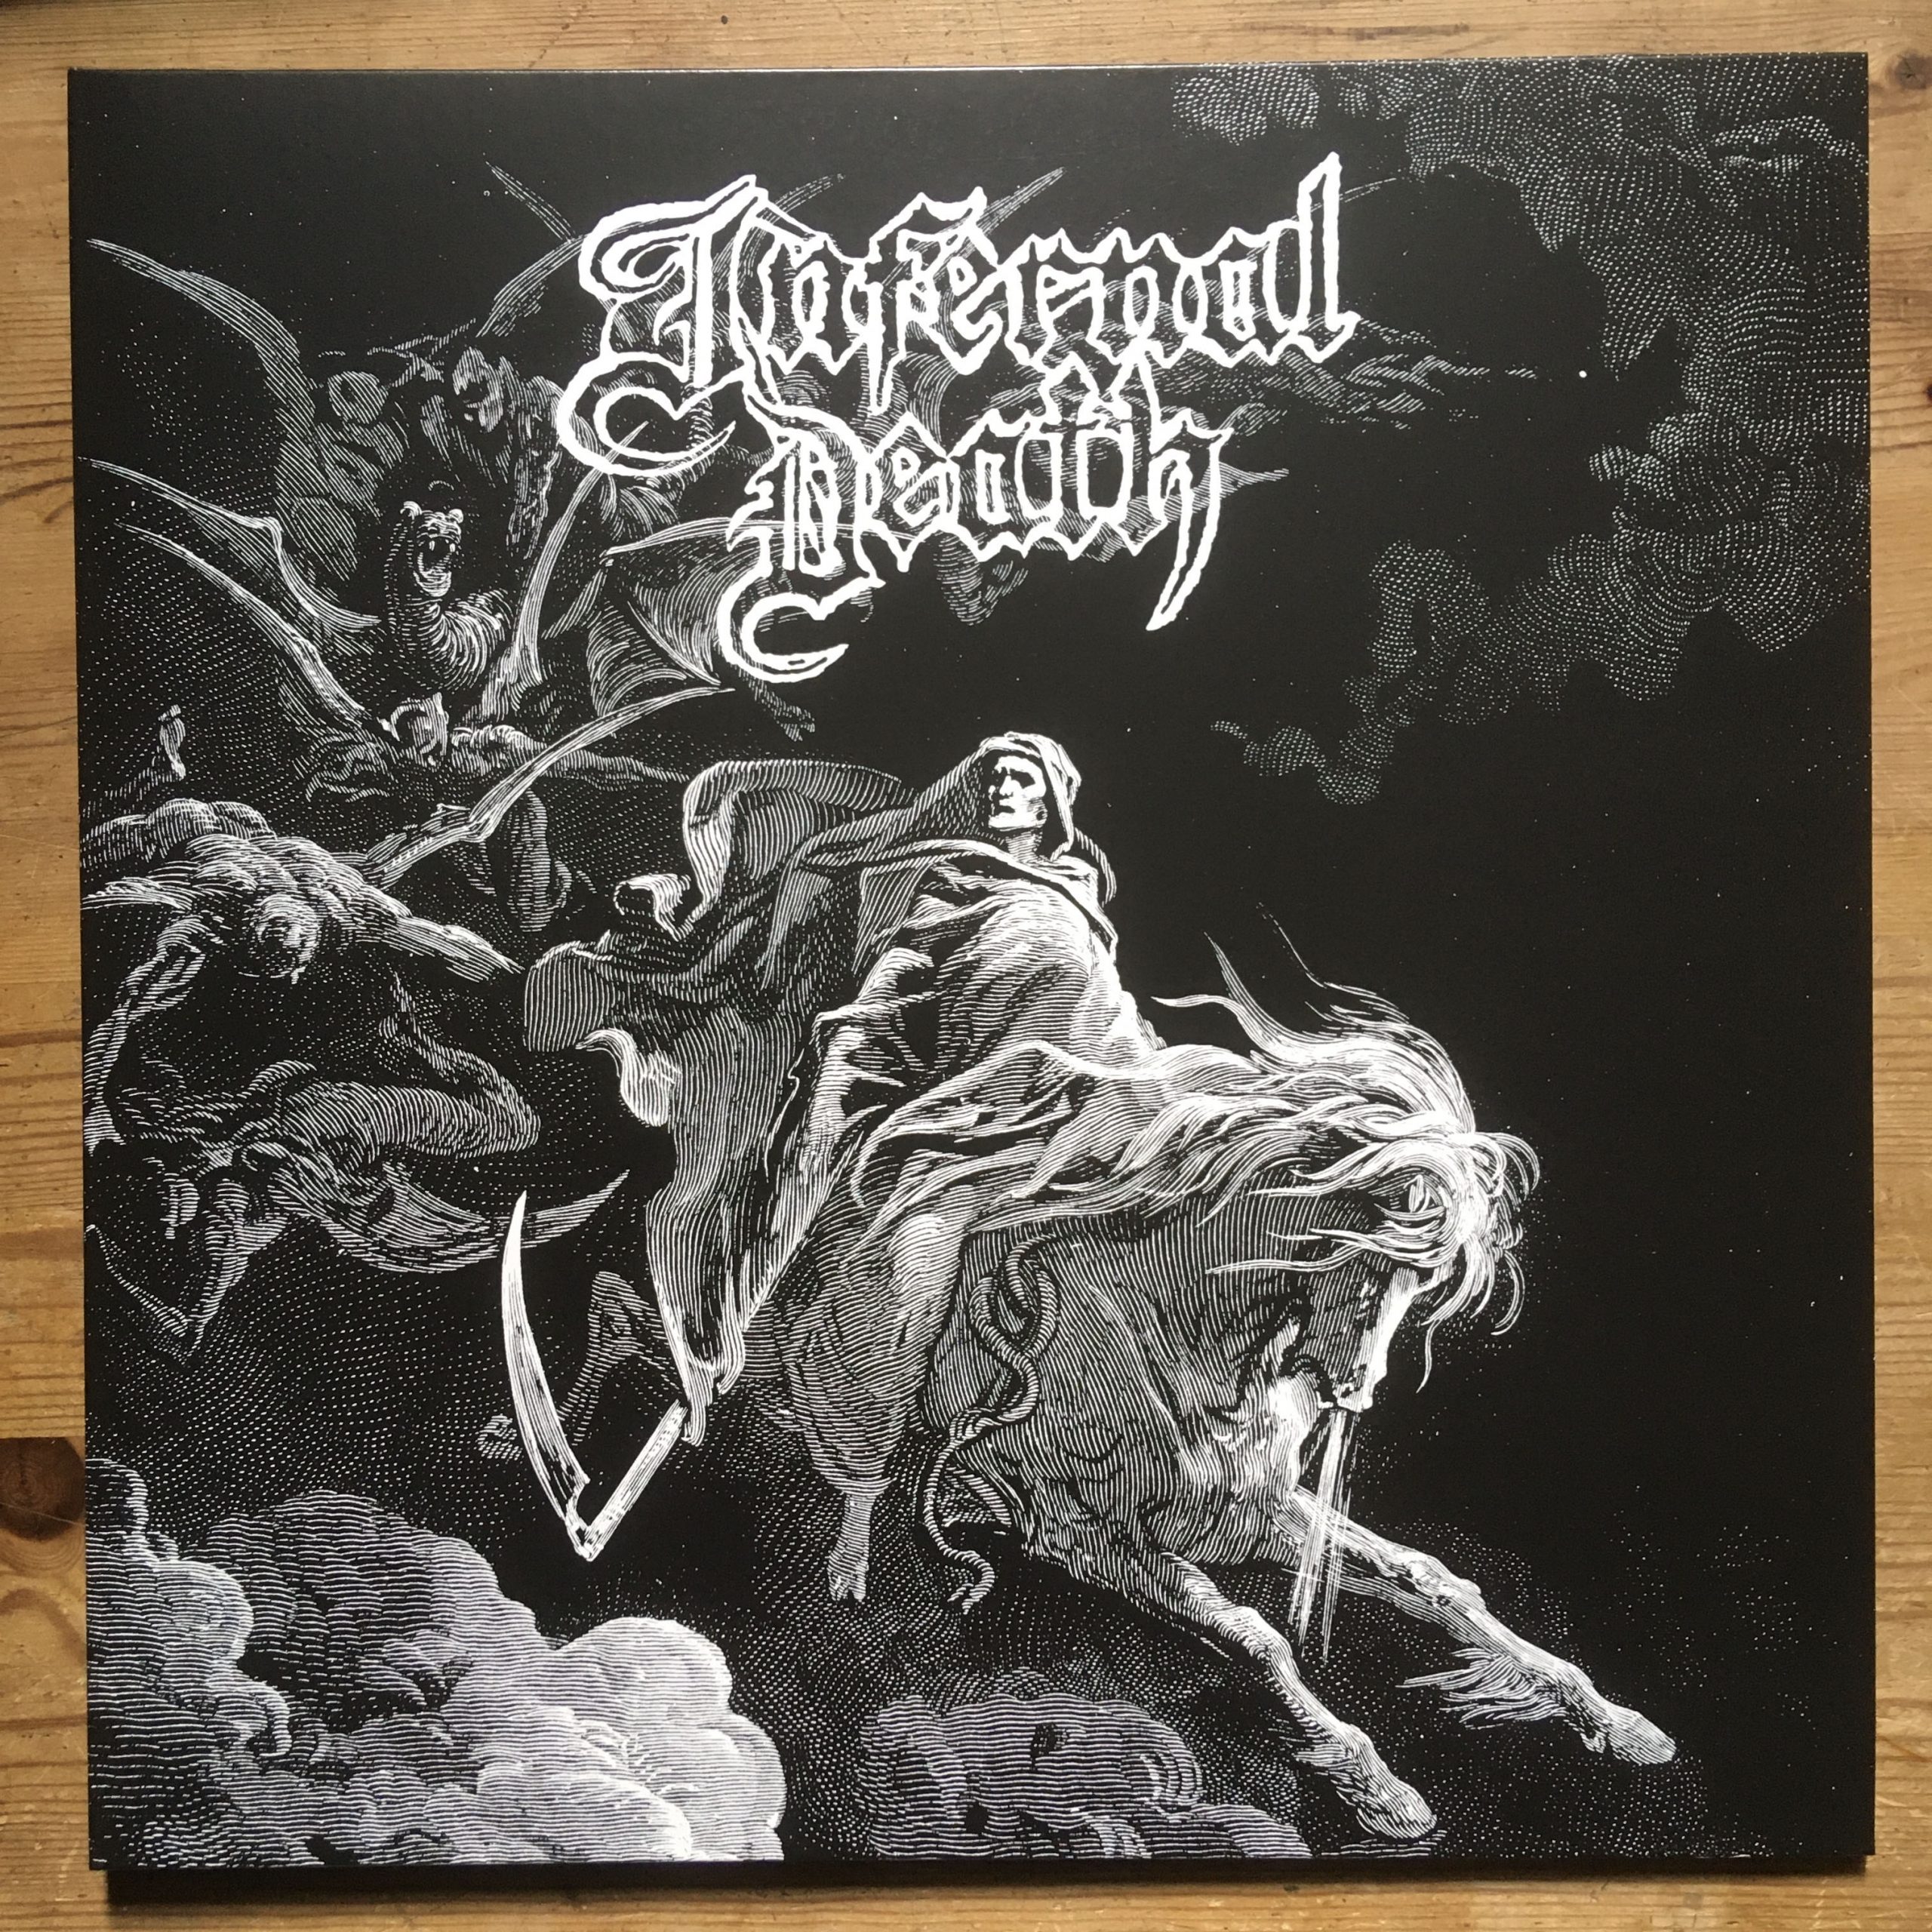 Photo of the Infernal Death - "Demo #1 / A Mirror Blackened" 2LP